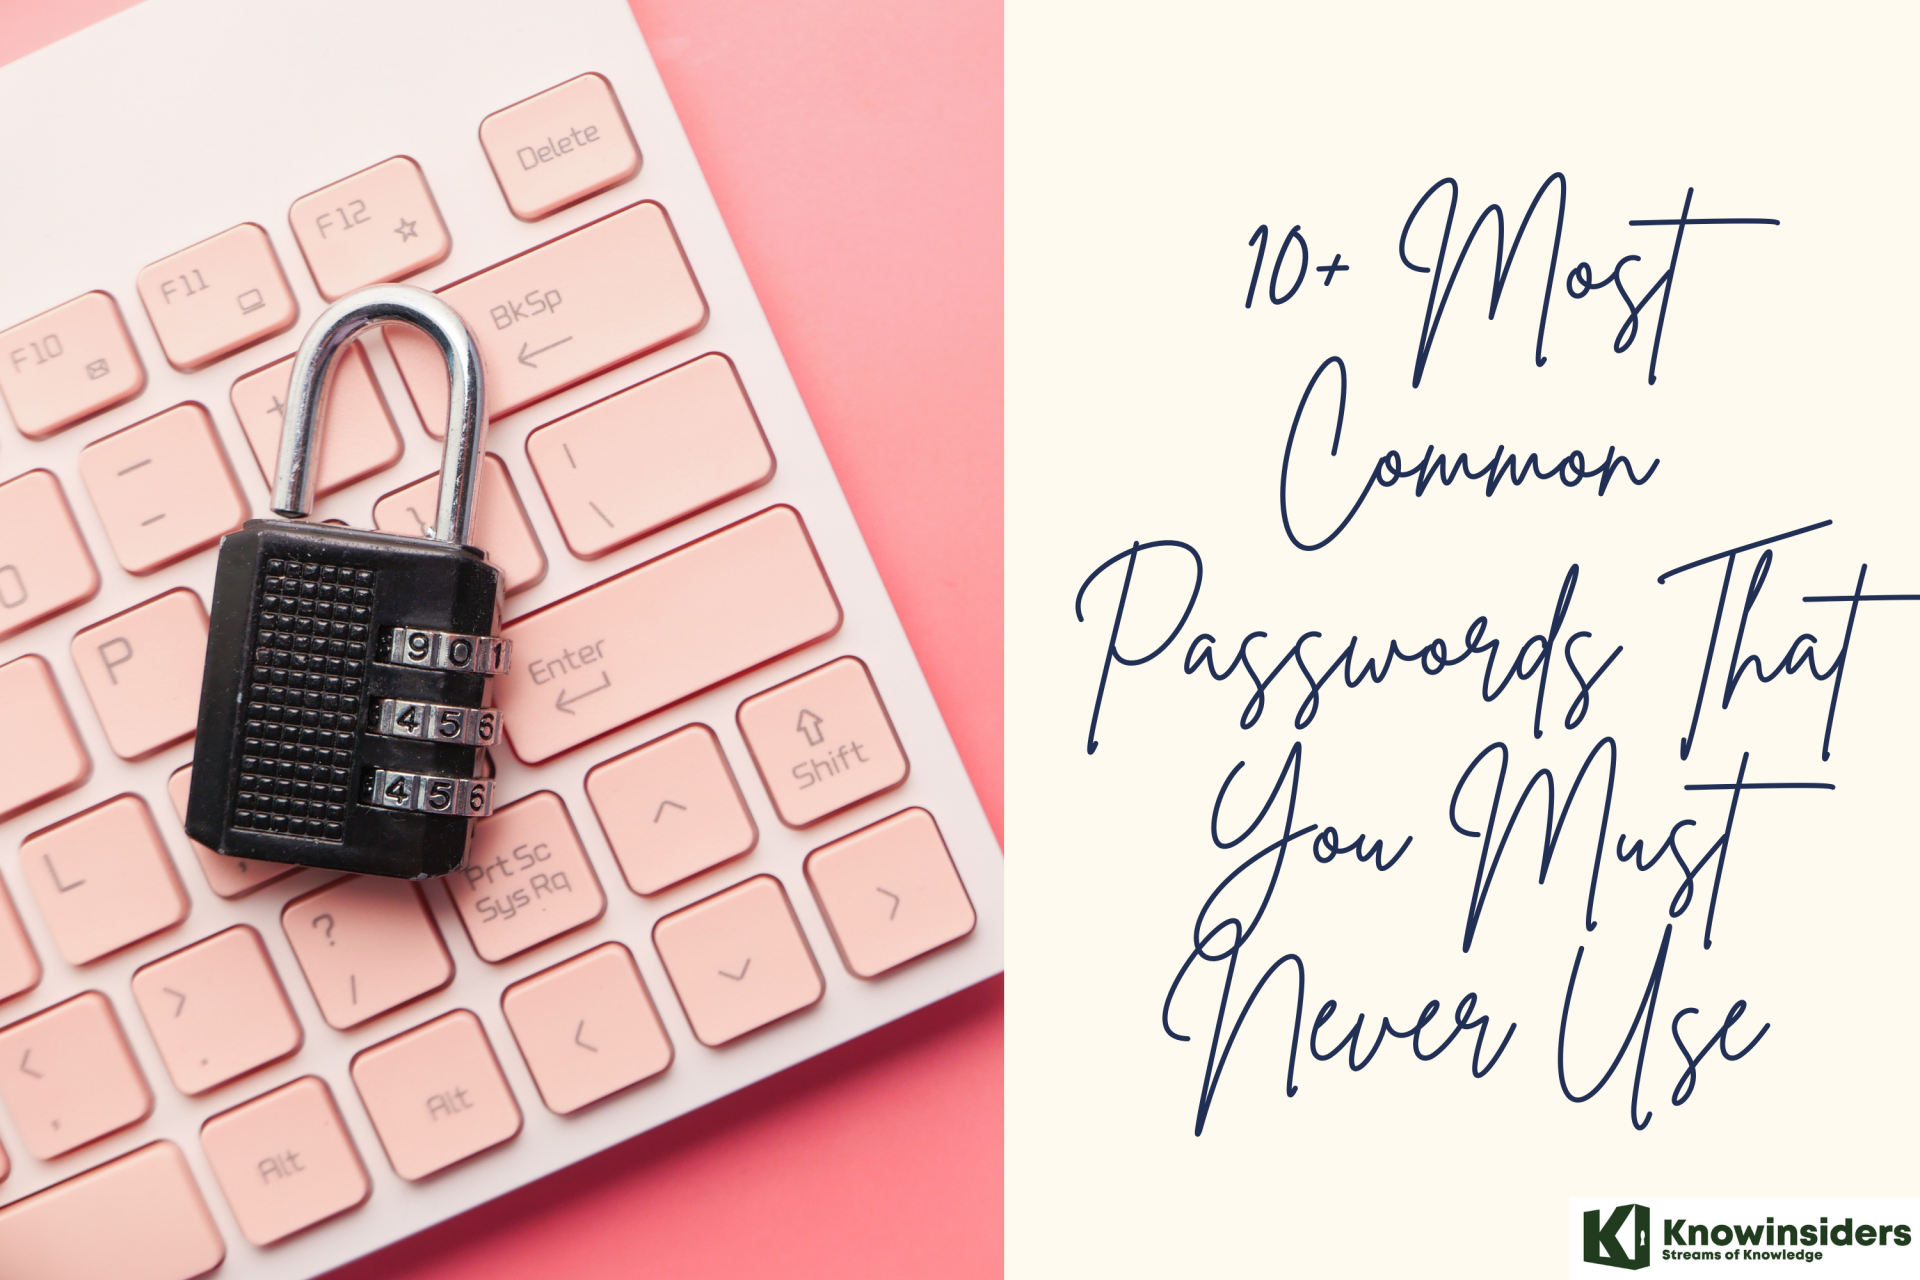 10+ Most Common Passwords That You Must Never Use